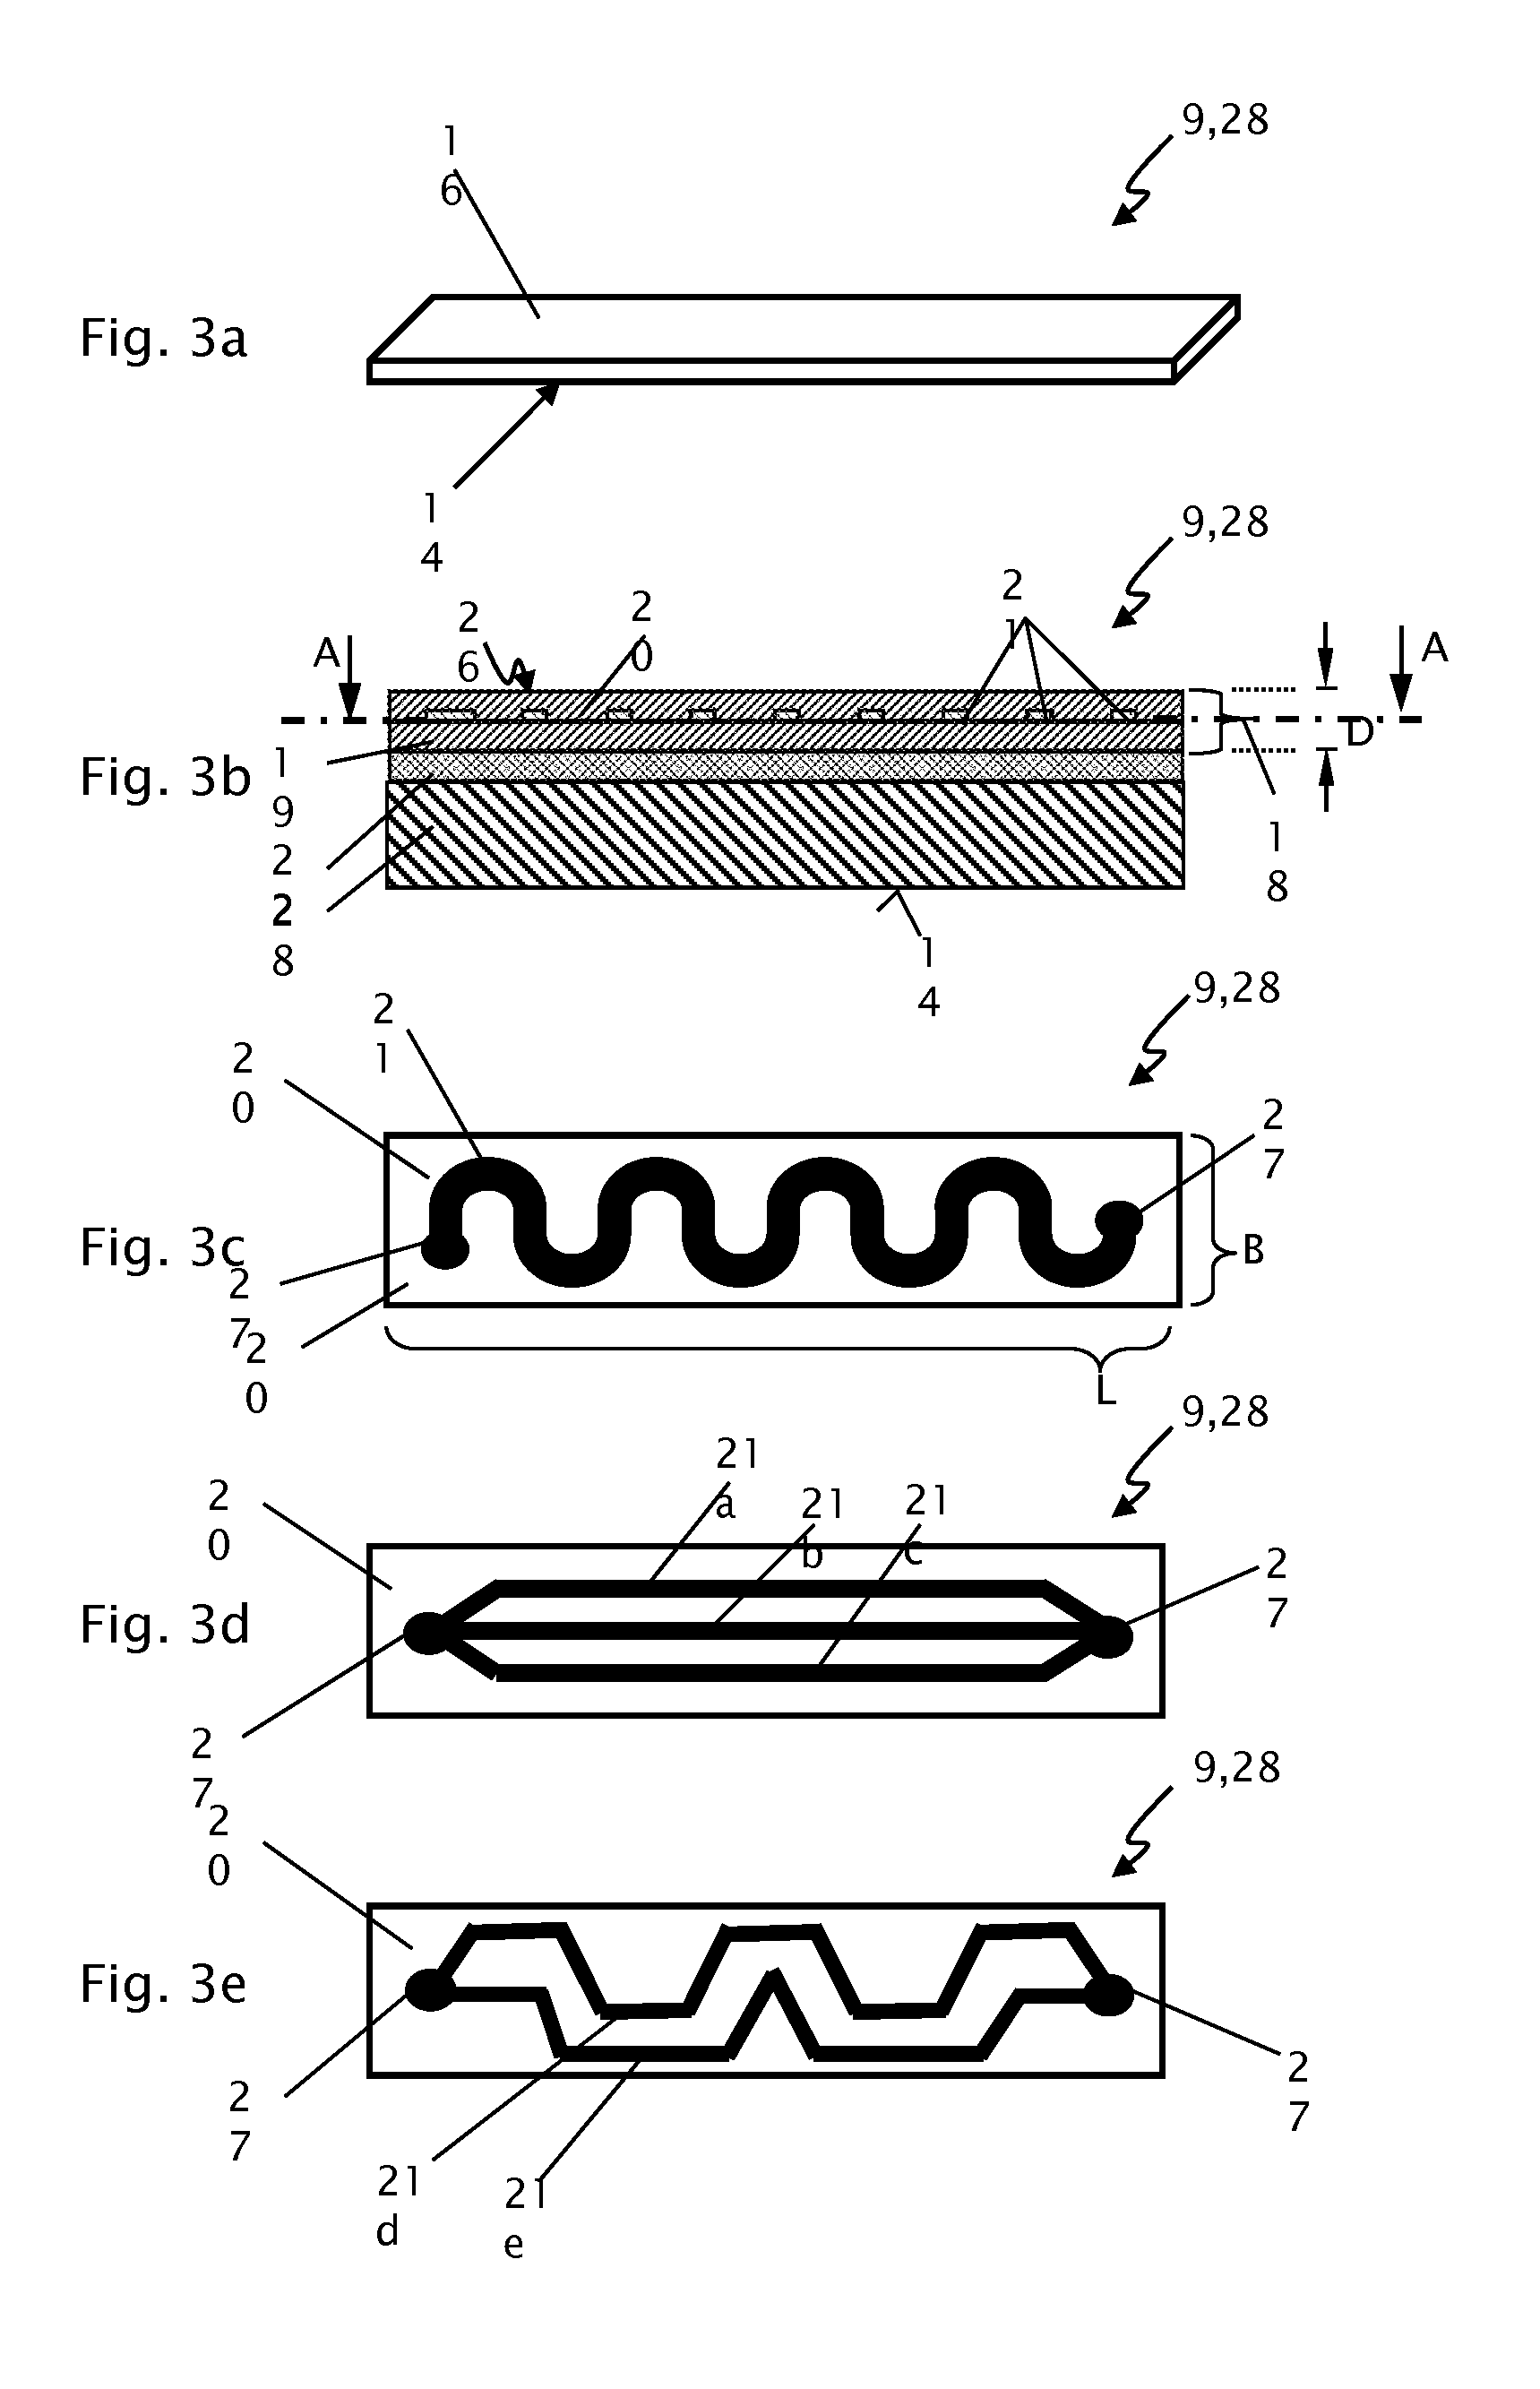 Road Finisher, Screed Plate, And Tamper Bar Comprising A Heating Element And Method To Manufacture The Same